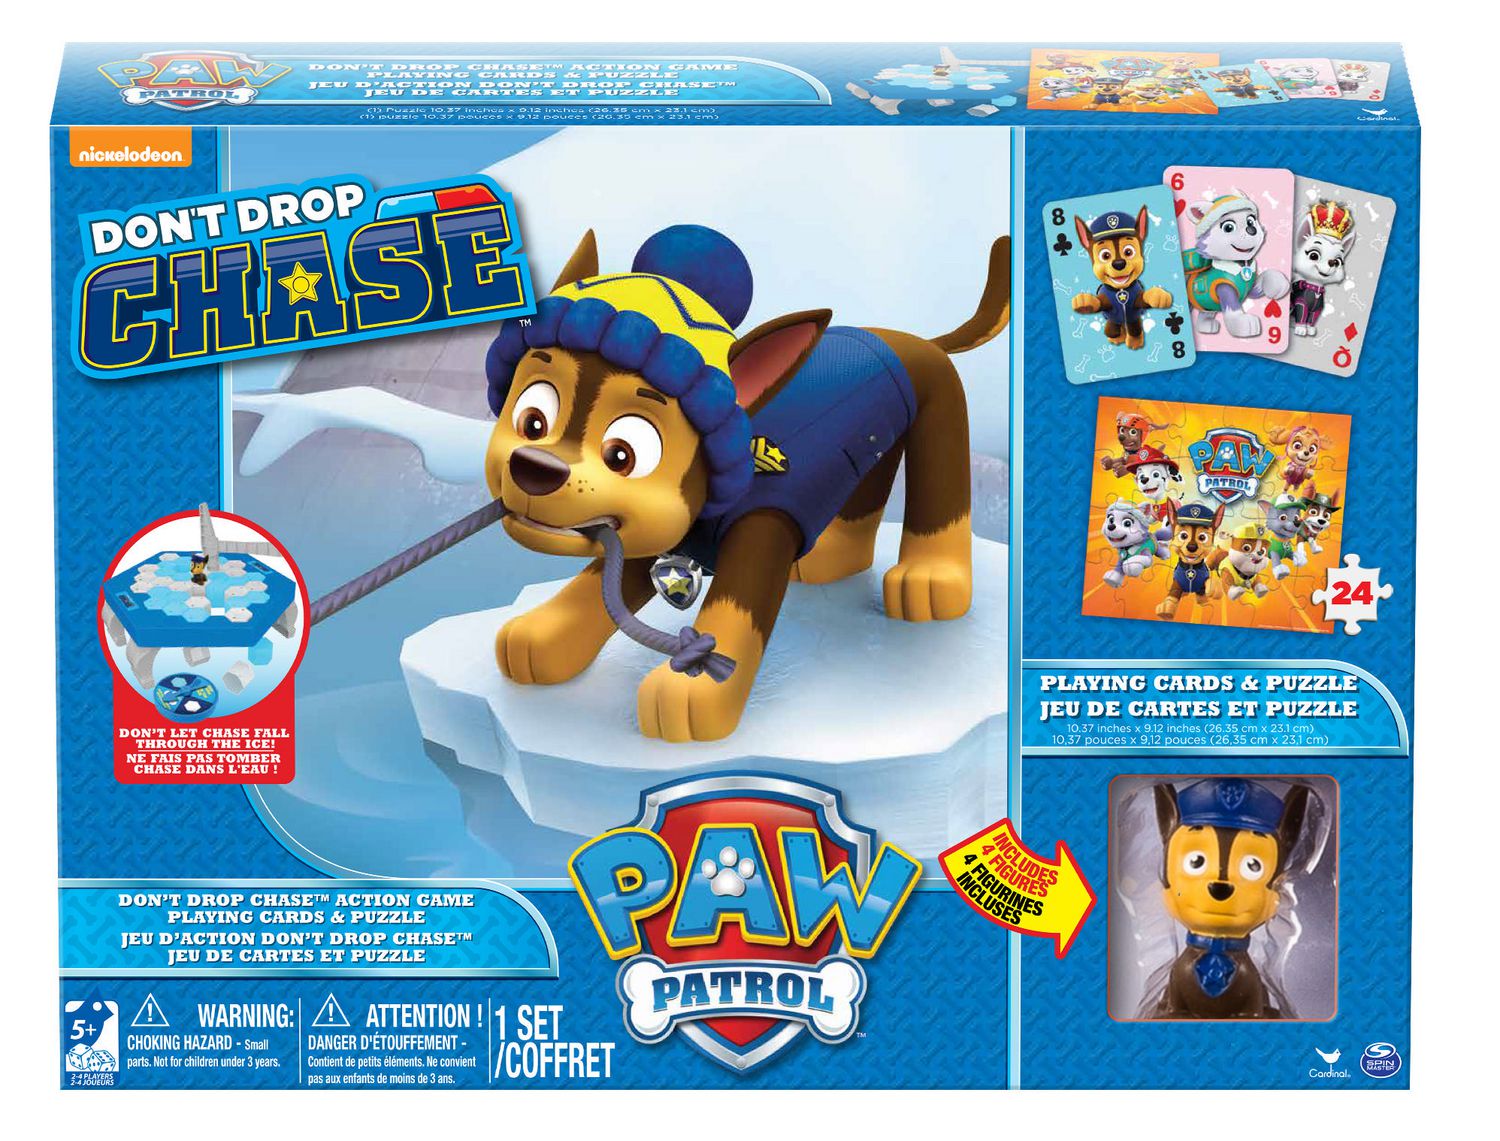 paw patrol don't drop chase action game, Five Below